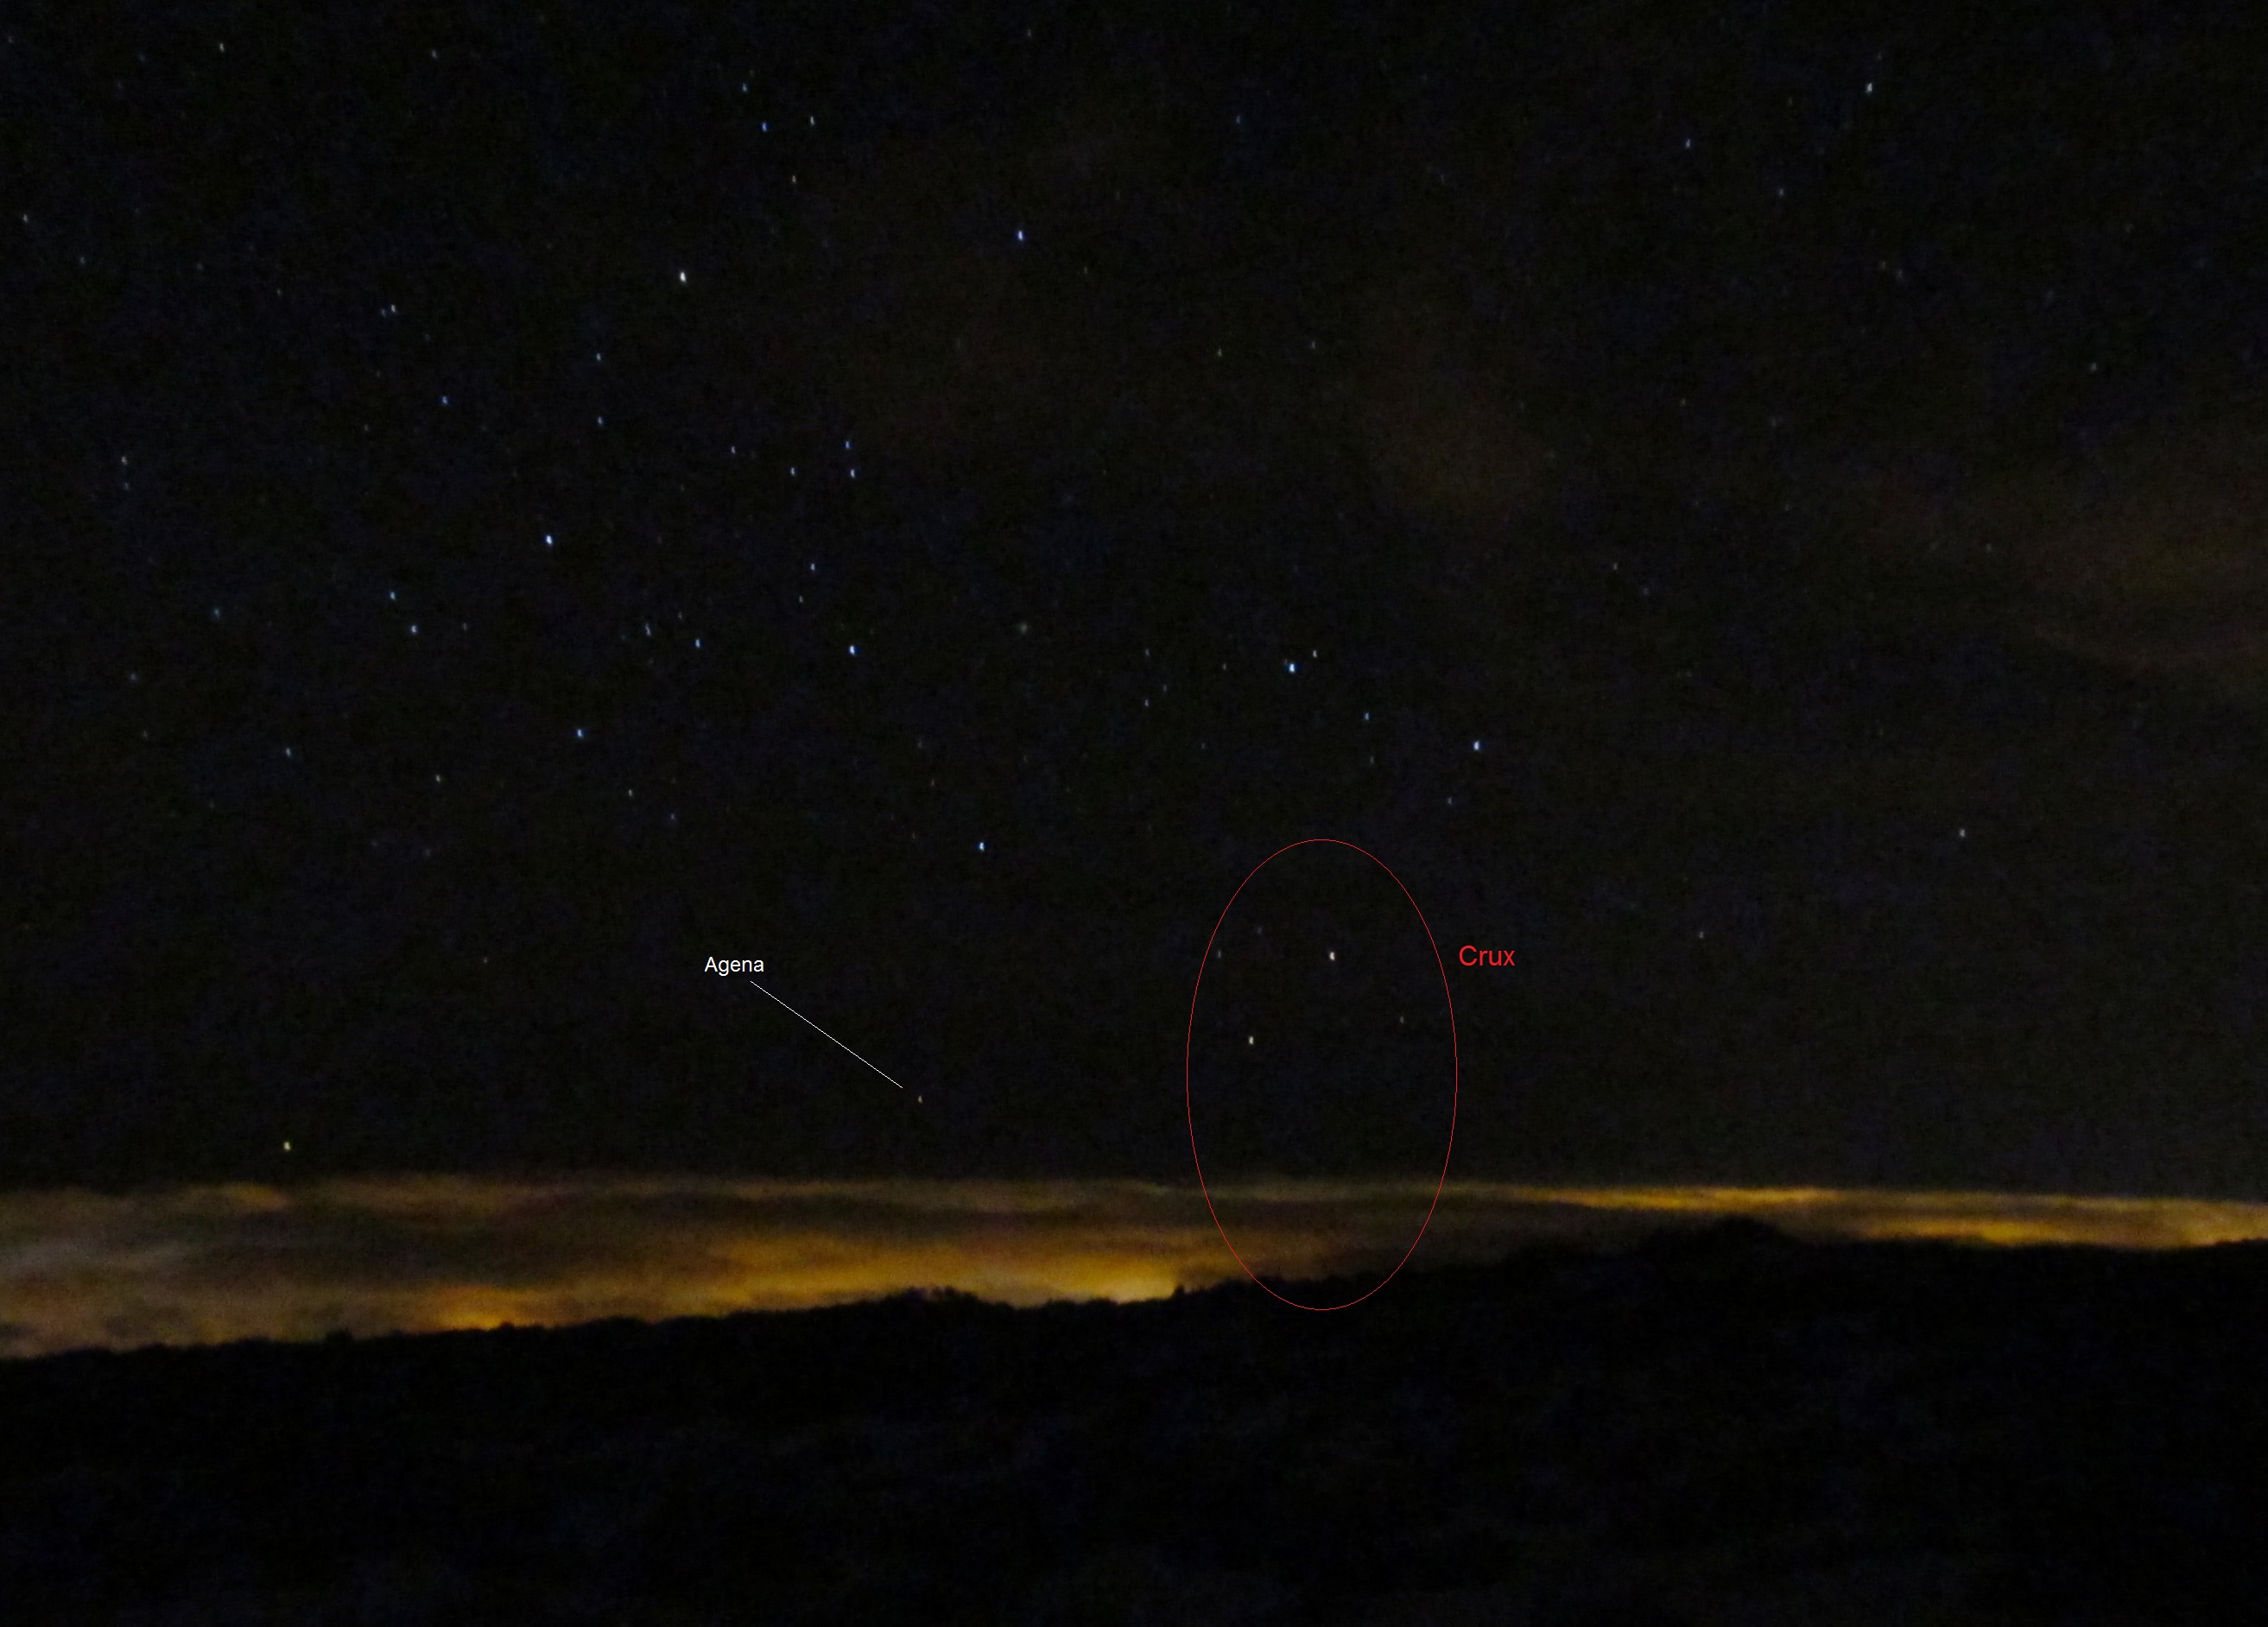 The Crux (South Cross) constellation seen from the Tenerife